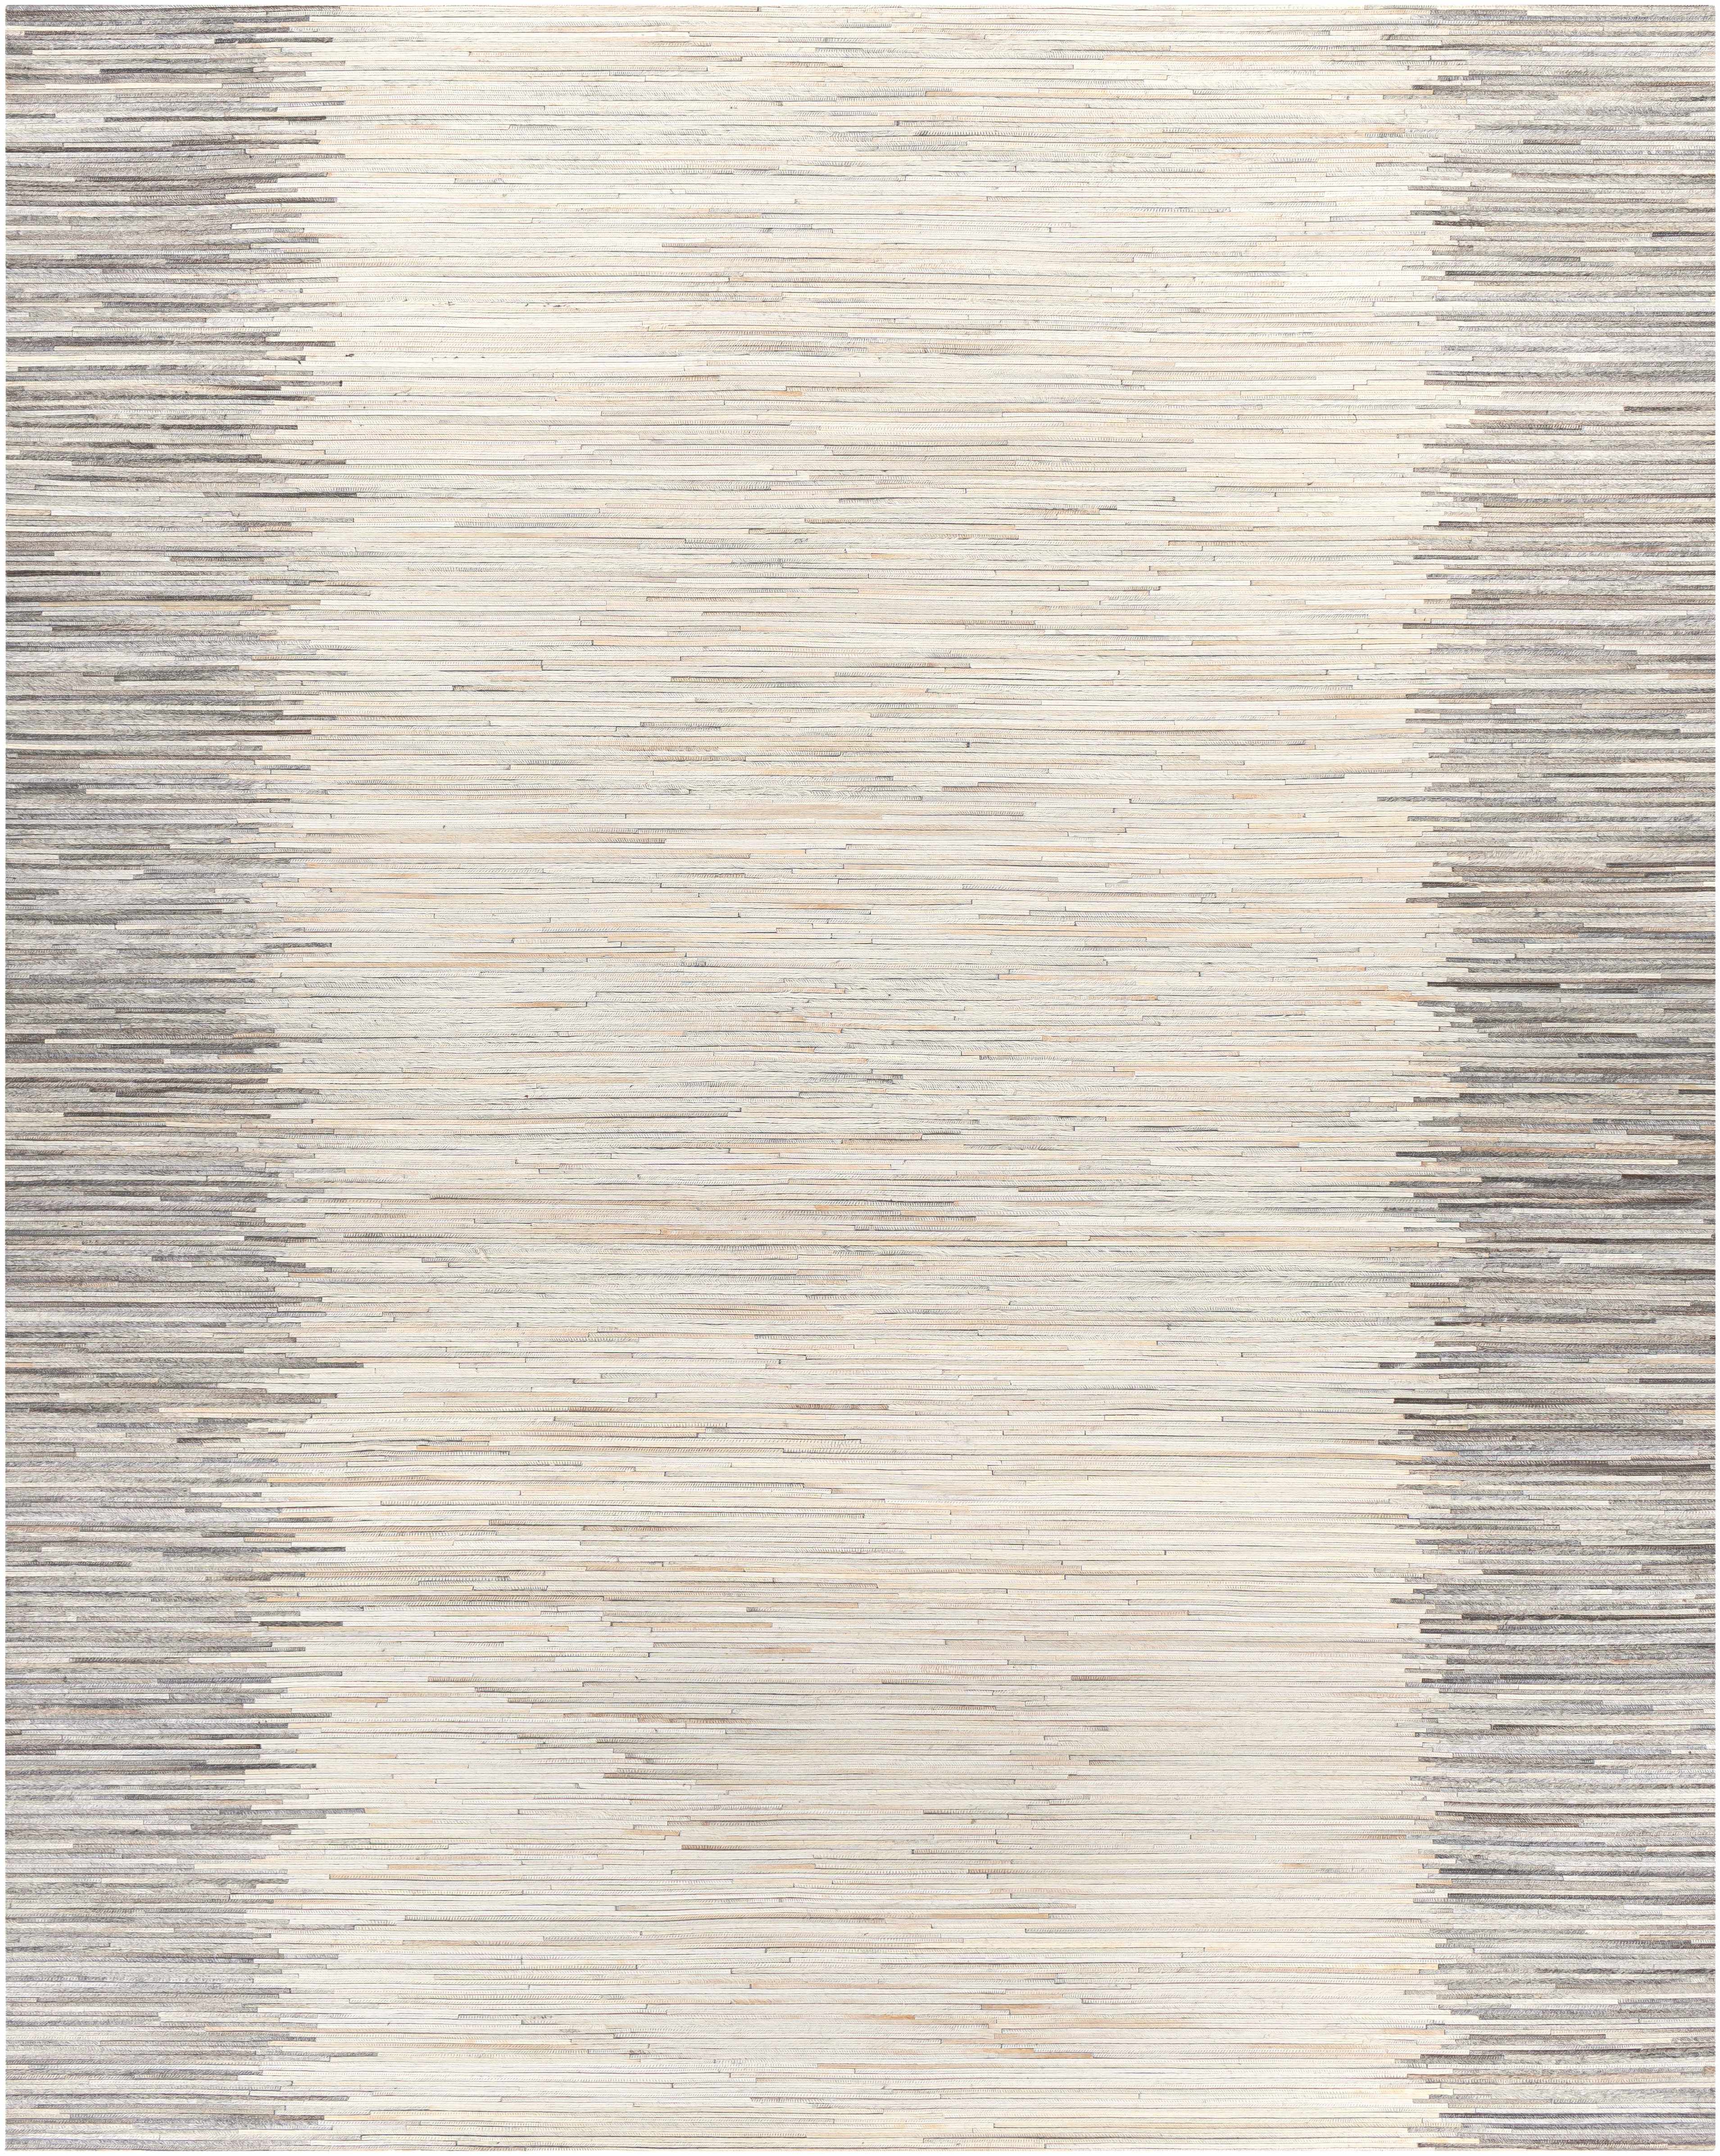 Suches 8' x 10' Hide, Leather & Fur Cowhide Leather Area Rug - Hauteloom